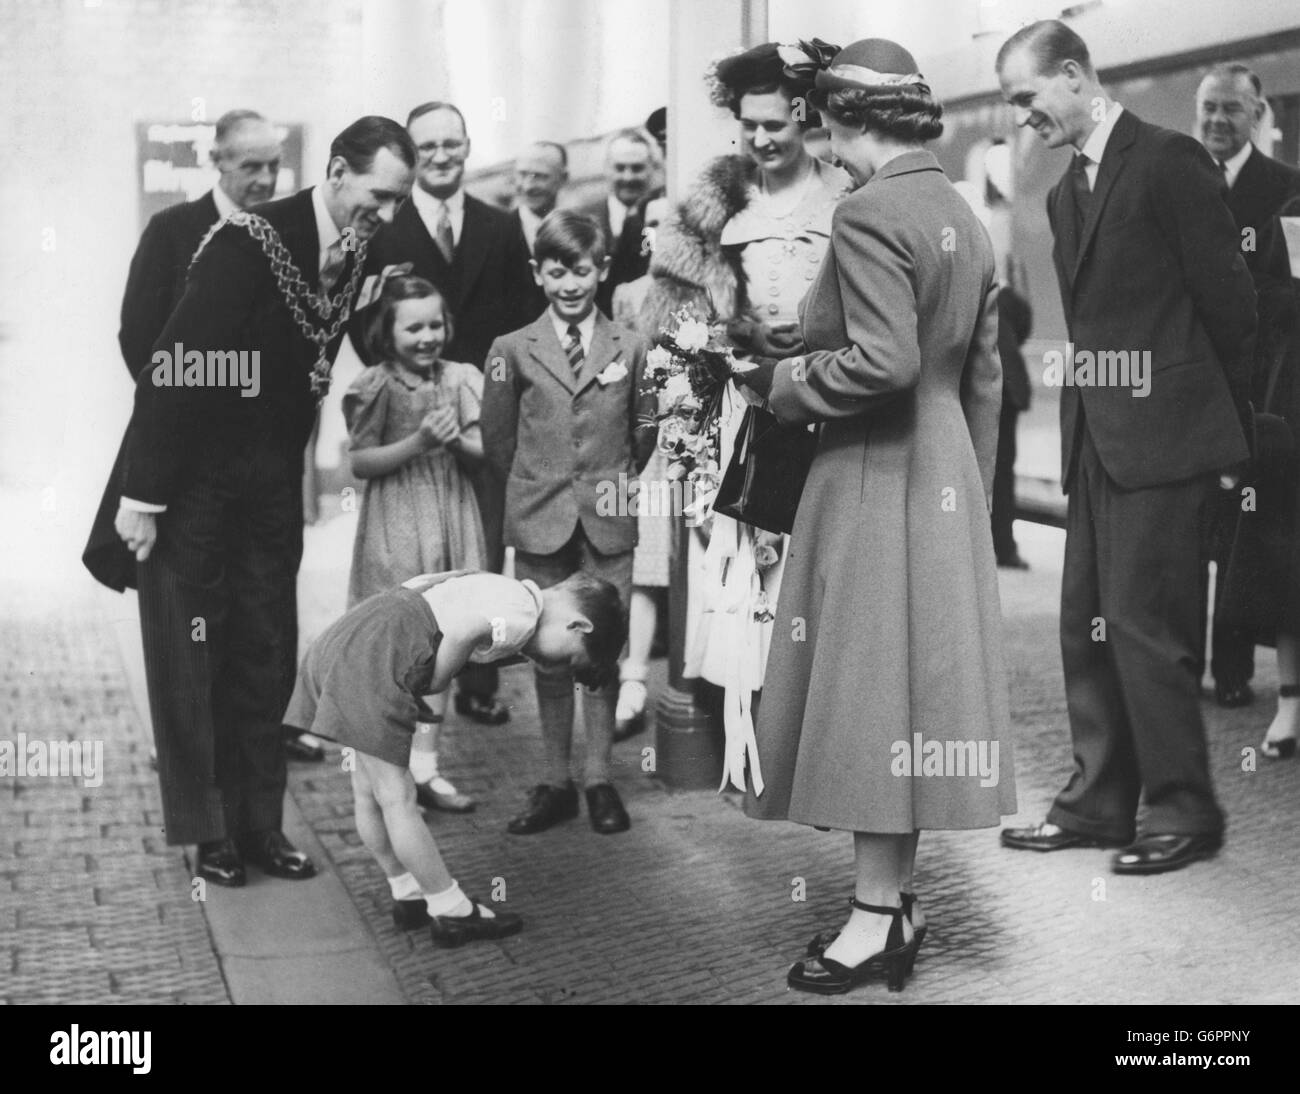 Michael Burman gives a whole-hearted bow to welcome Princess Elizabeth ...